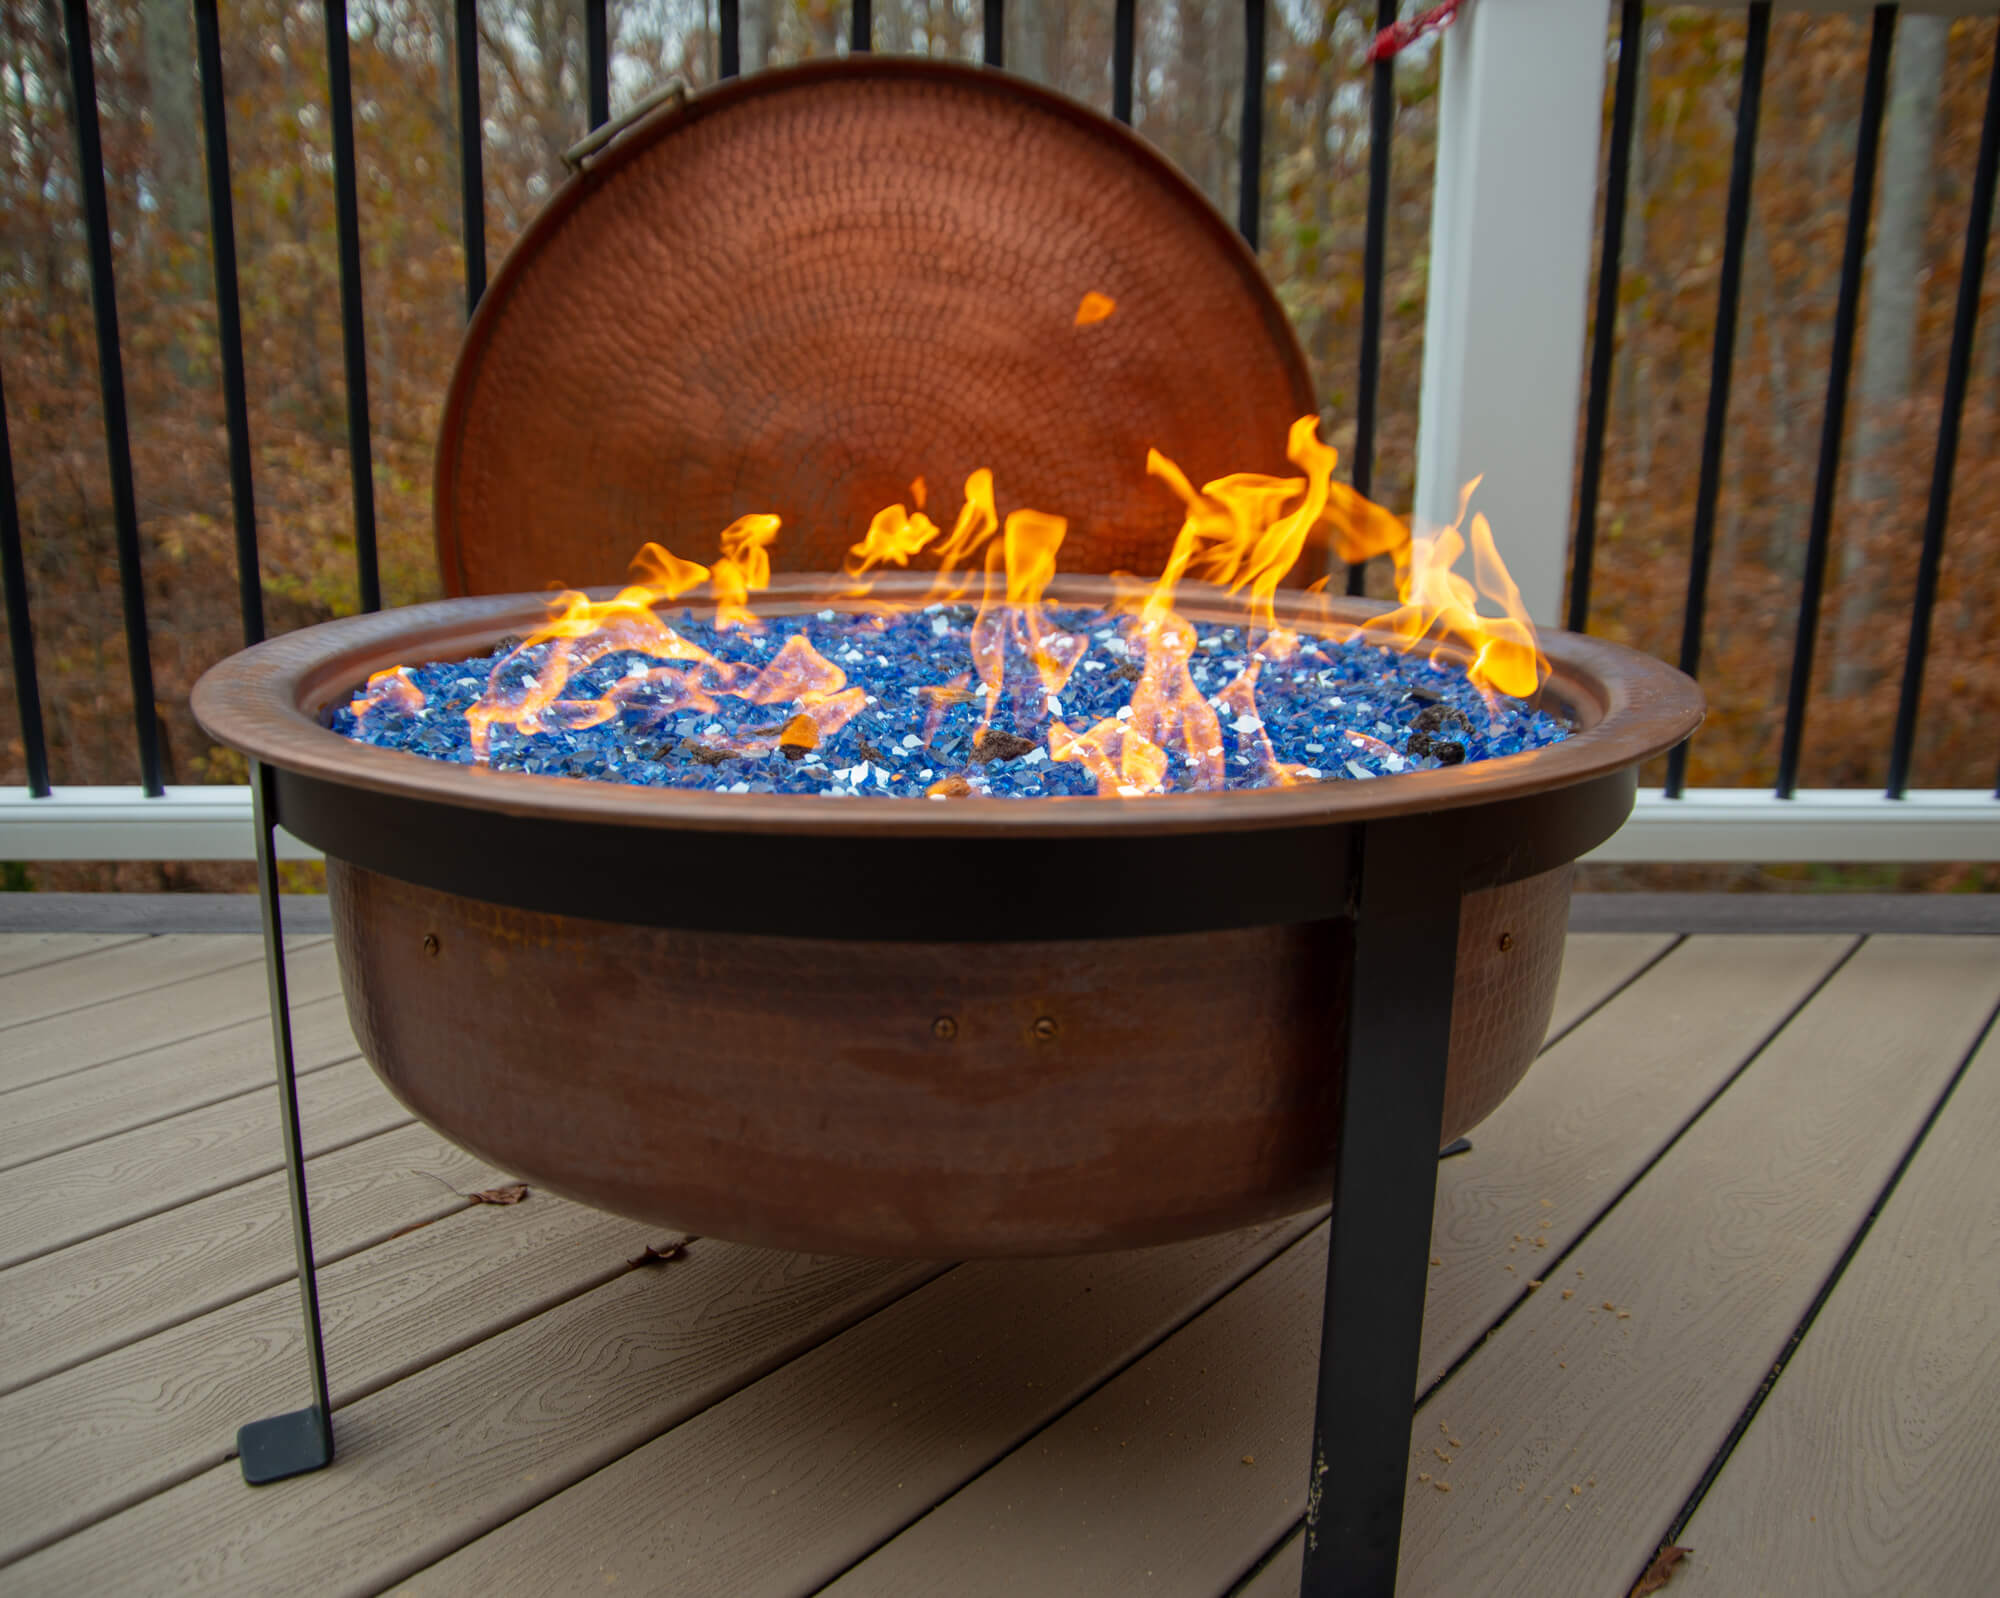 6 Ways To Put A Fire Pit On Wooden Deck, Are Propane Fire Pits Safe On Wood Decks